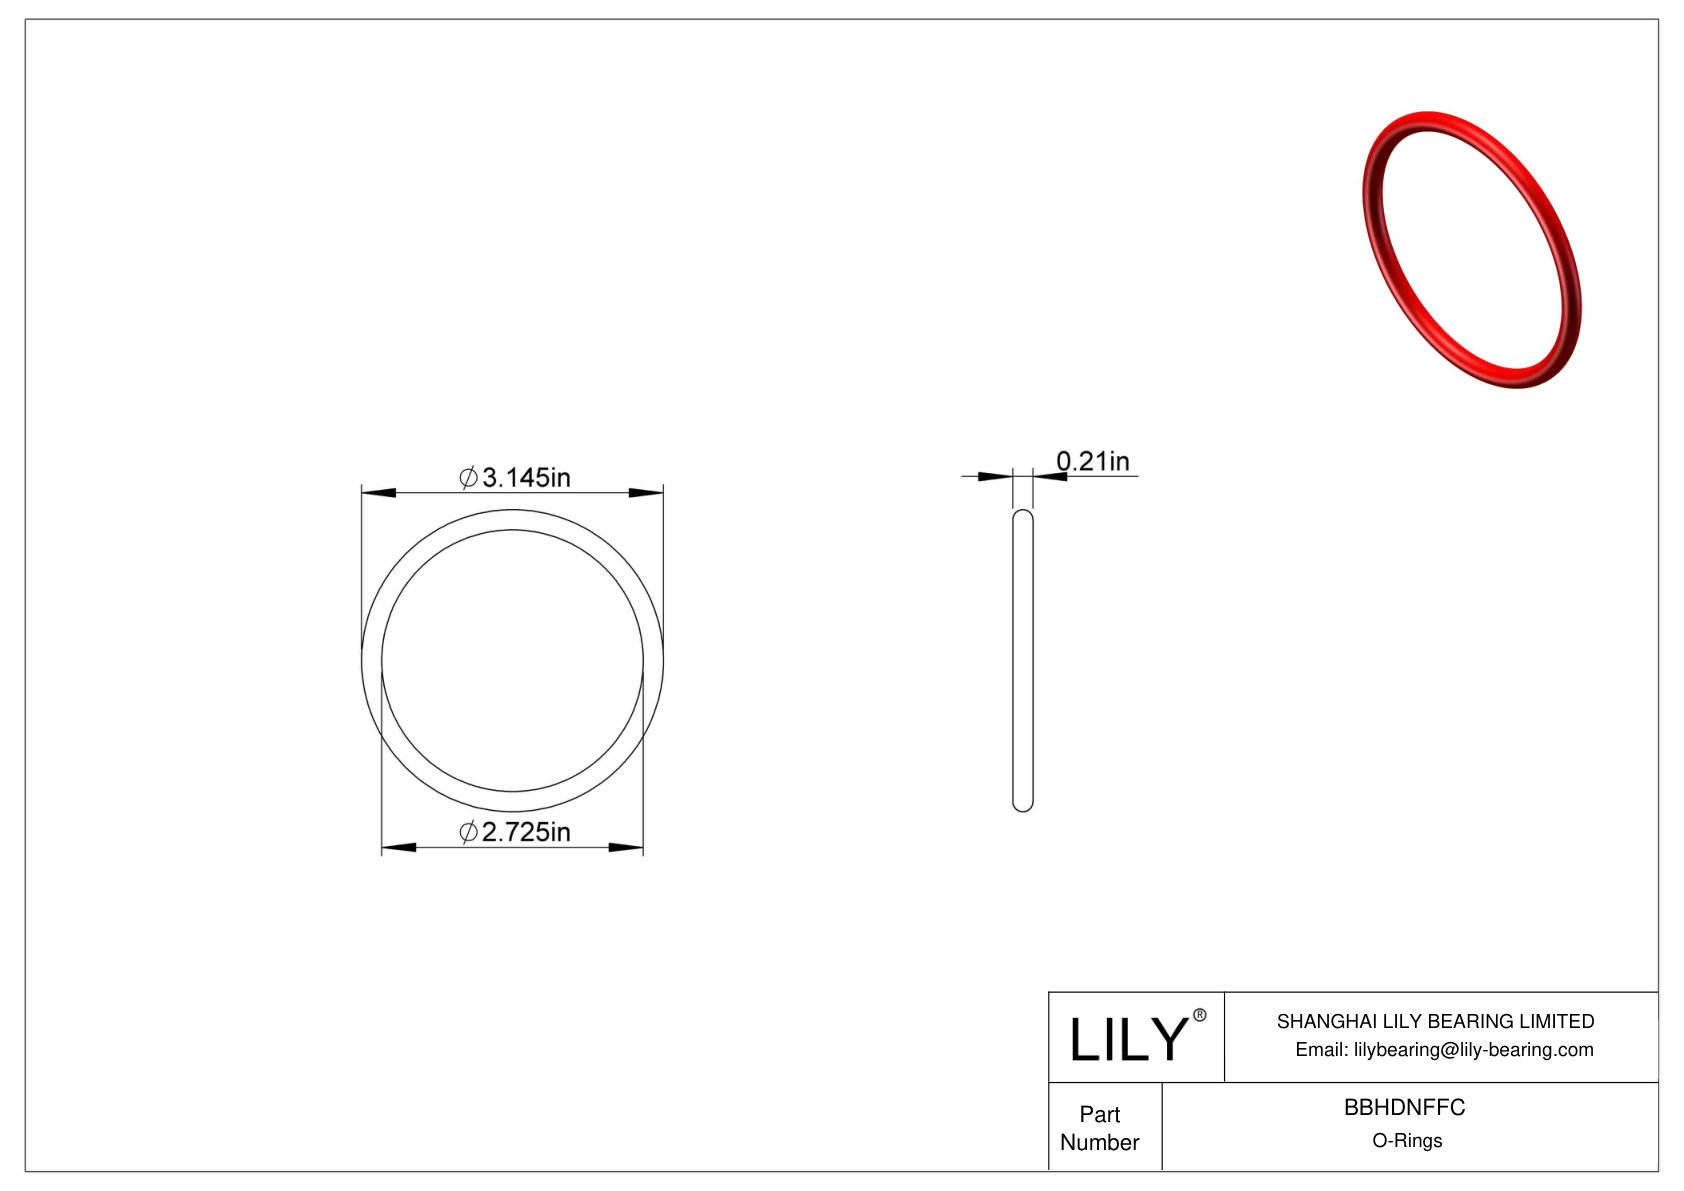 BBHDNFFC High Temperature O-Rings Round cad drawing